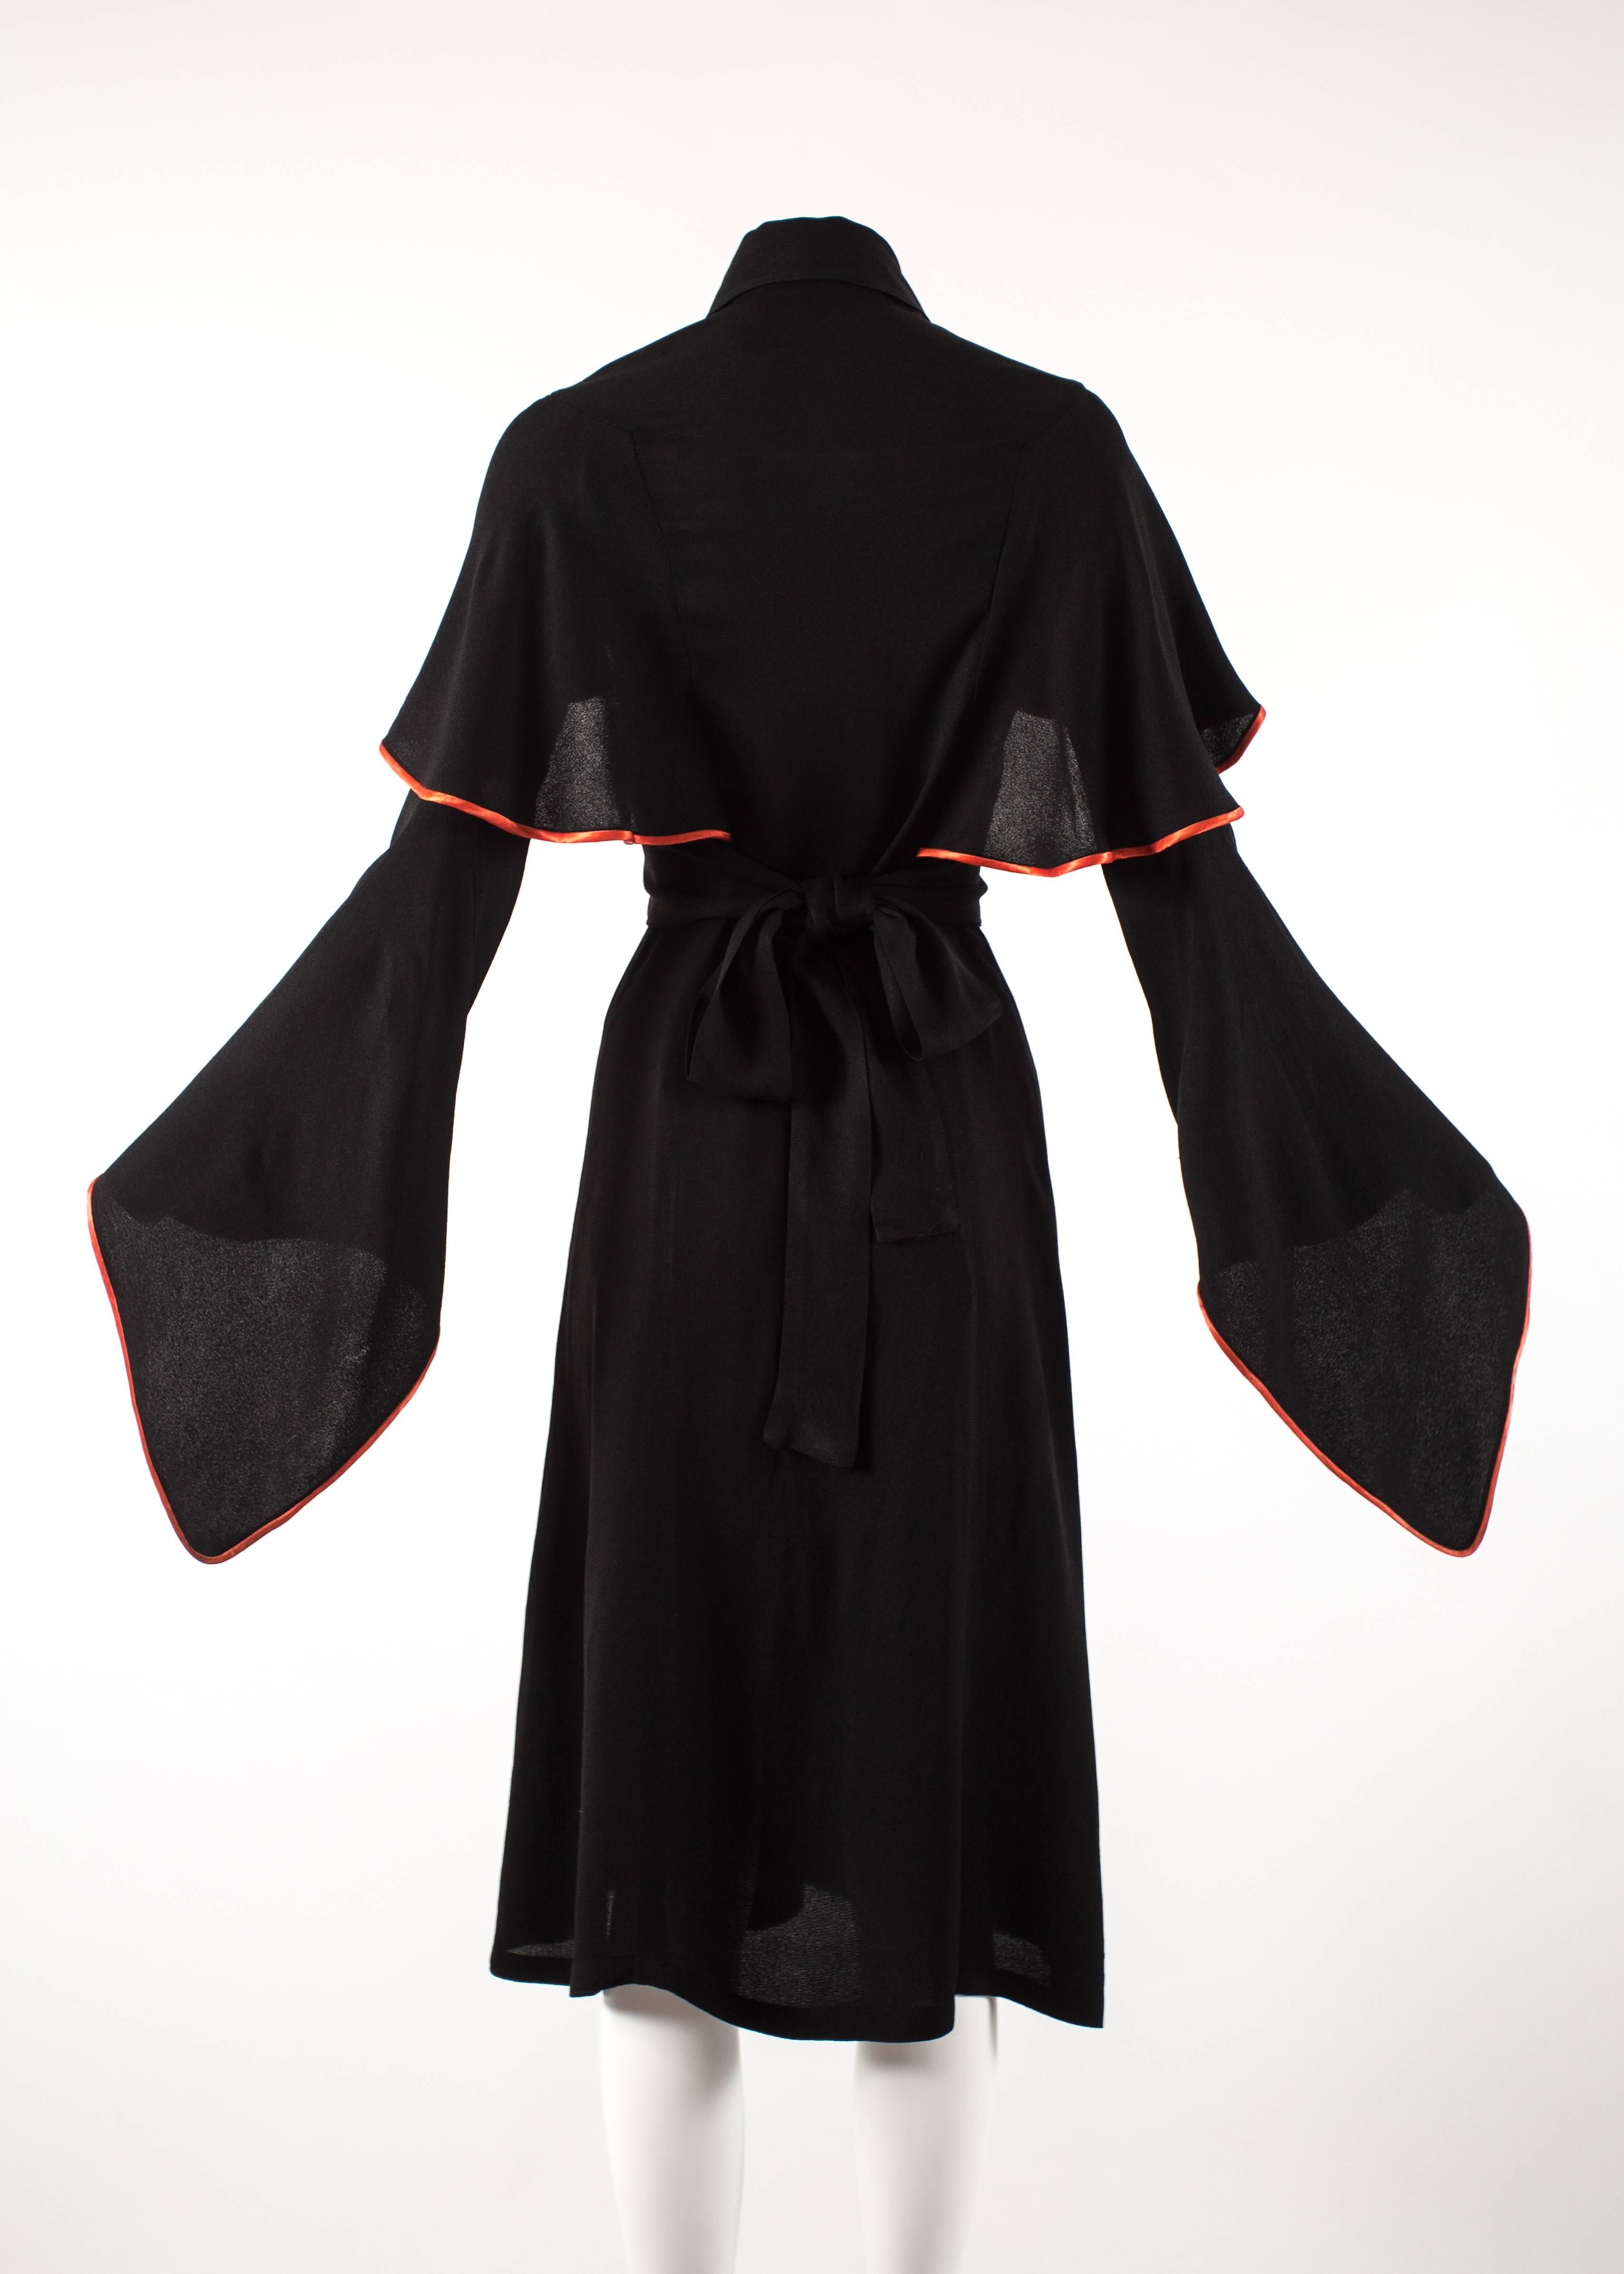 Women's Ossie Clark 1970 black moss crepe mid length dress with red satin trim 